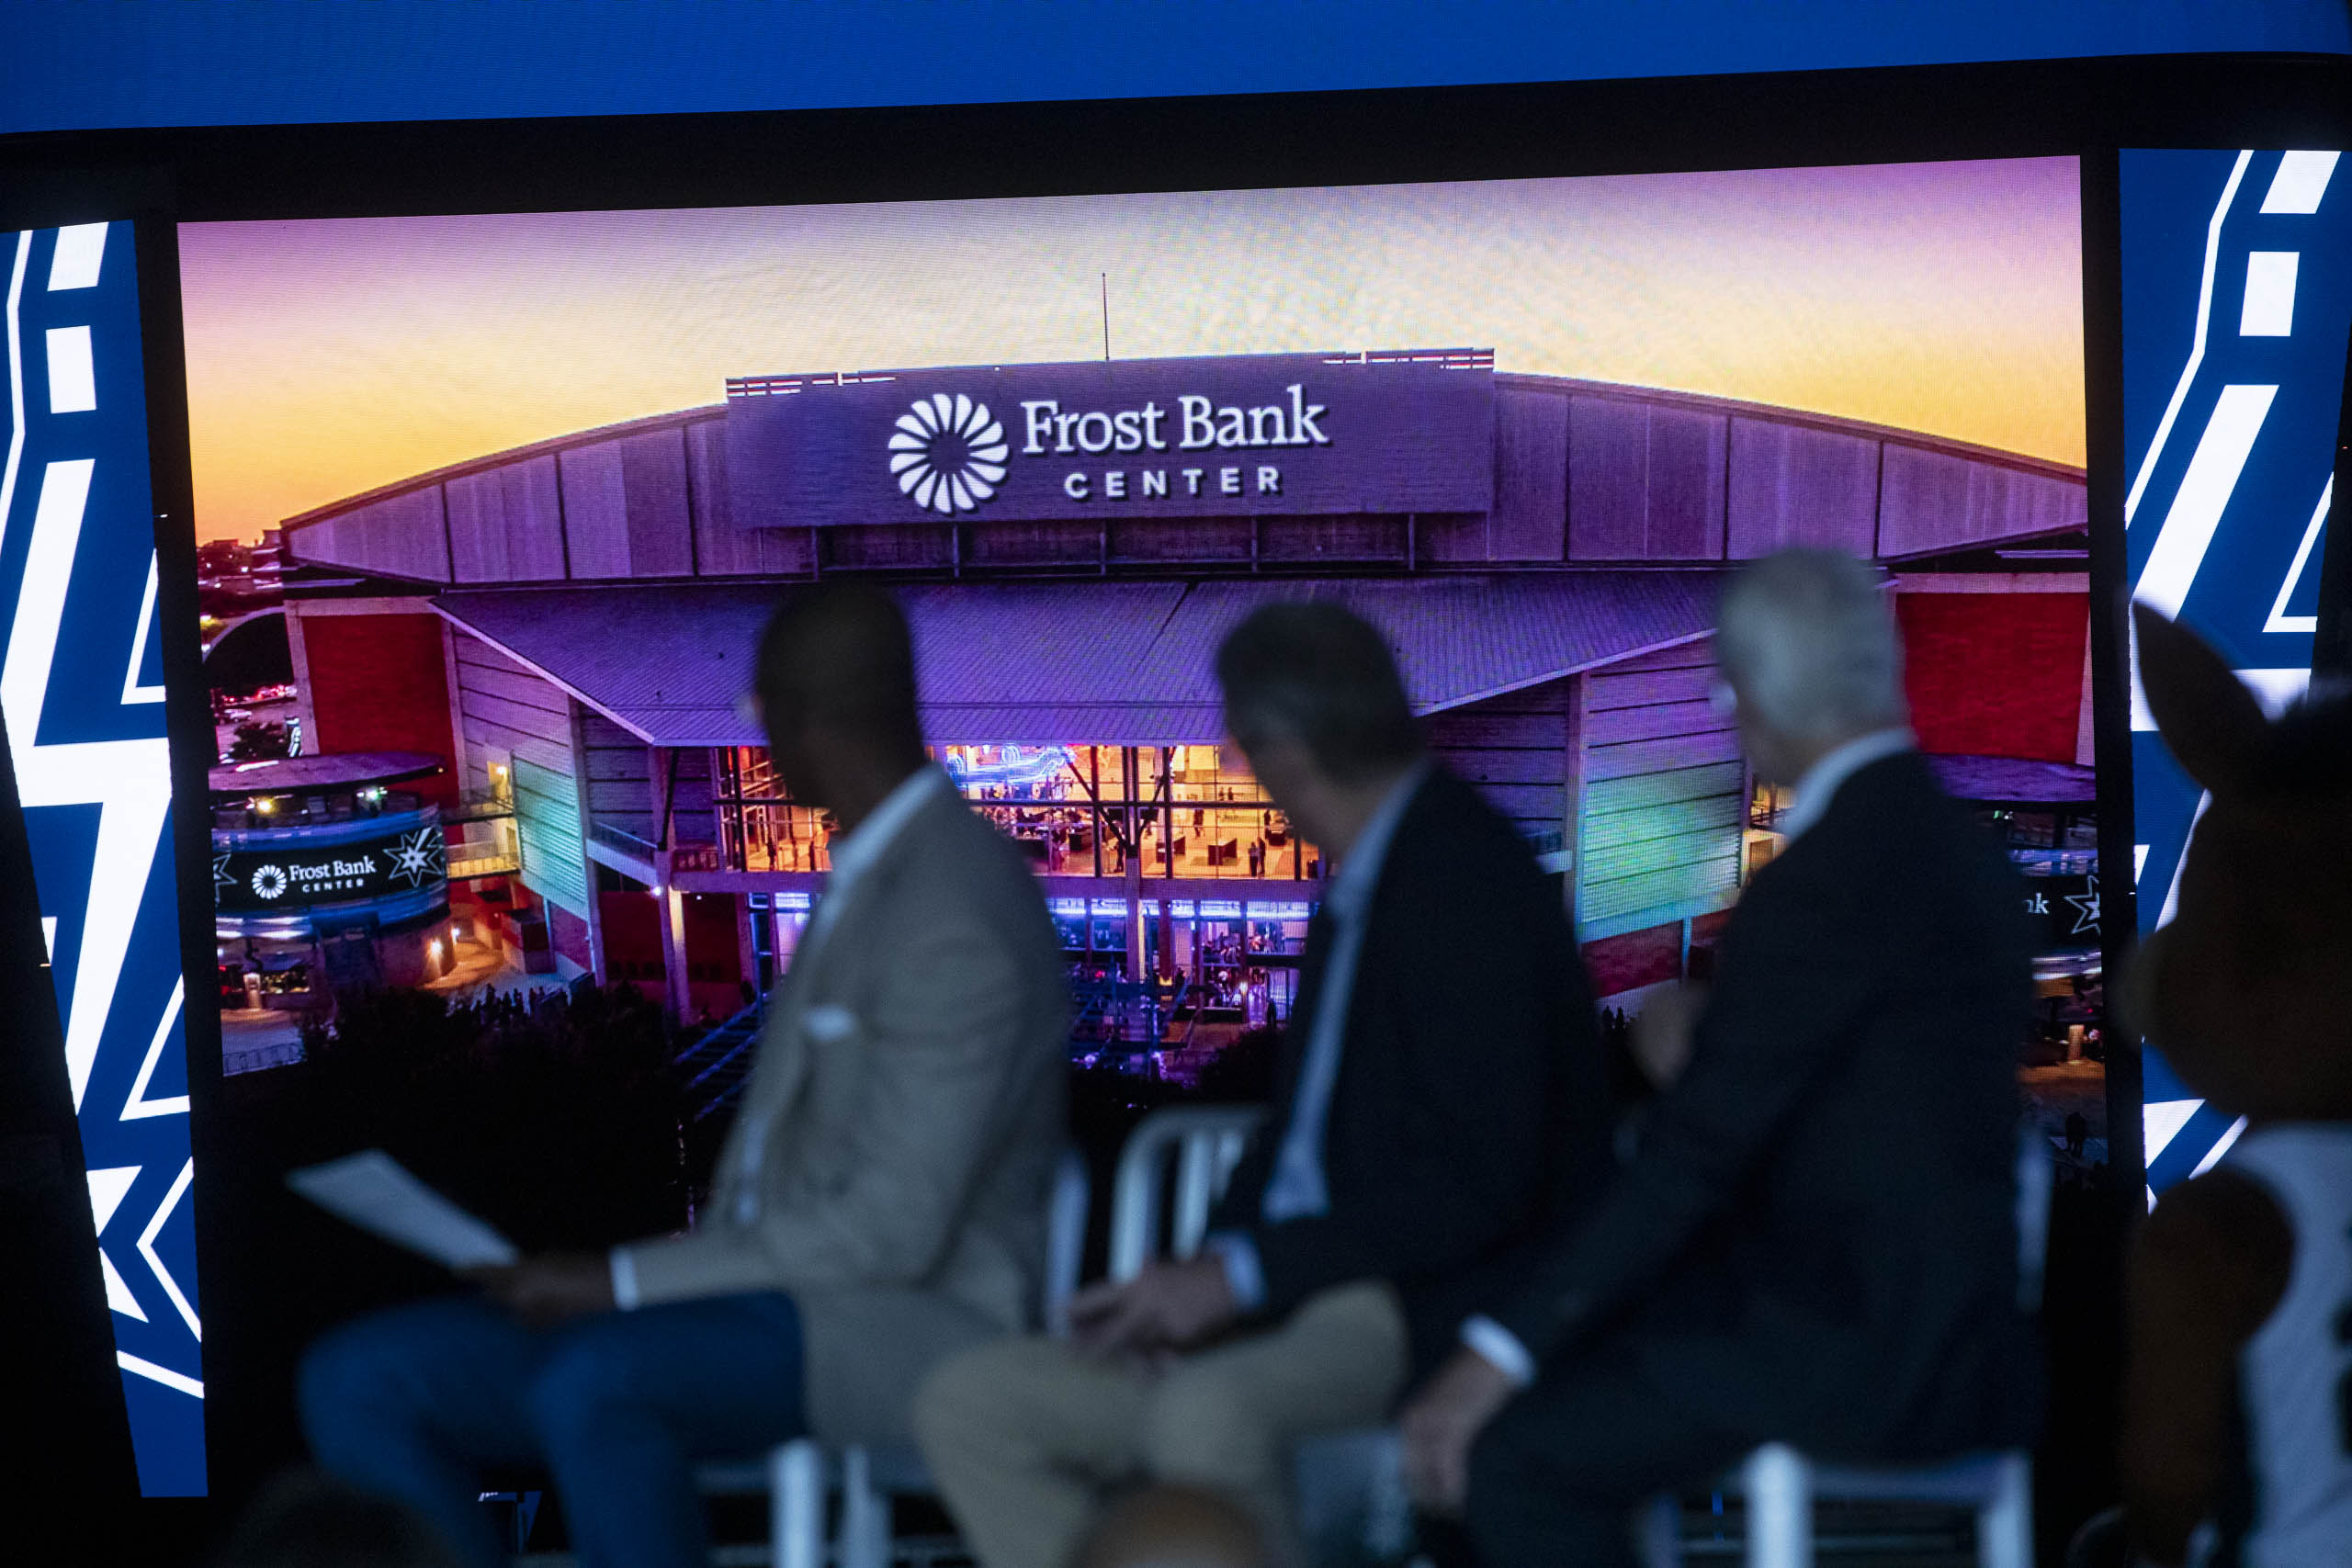 Its official The home of the San Antonio Spurs is now the Frost Bank Center